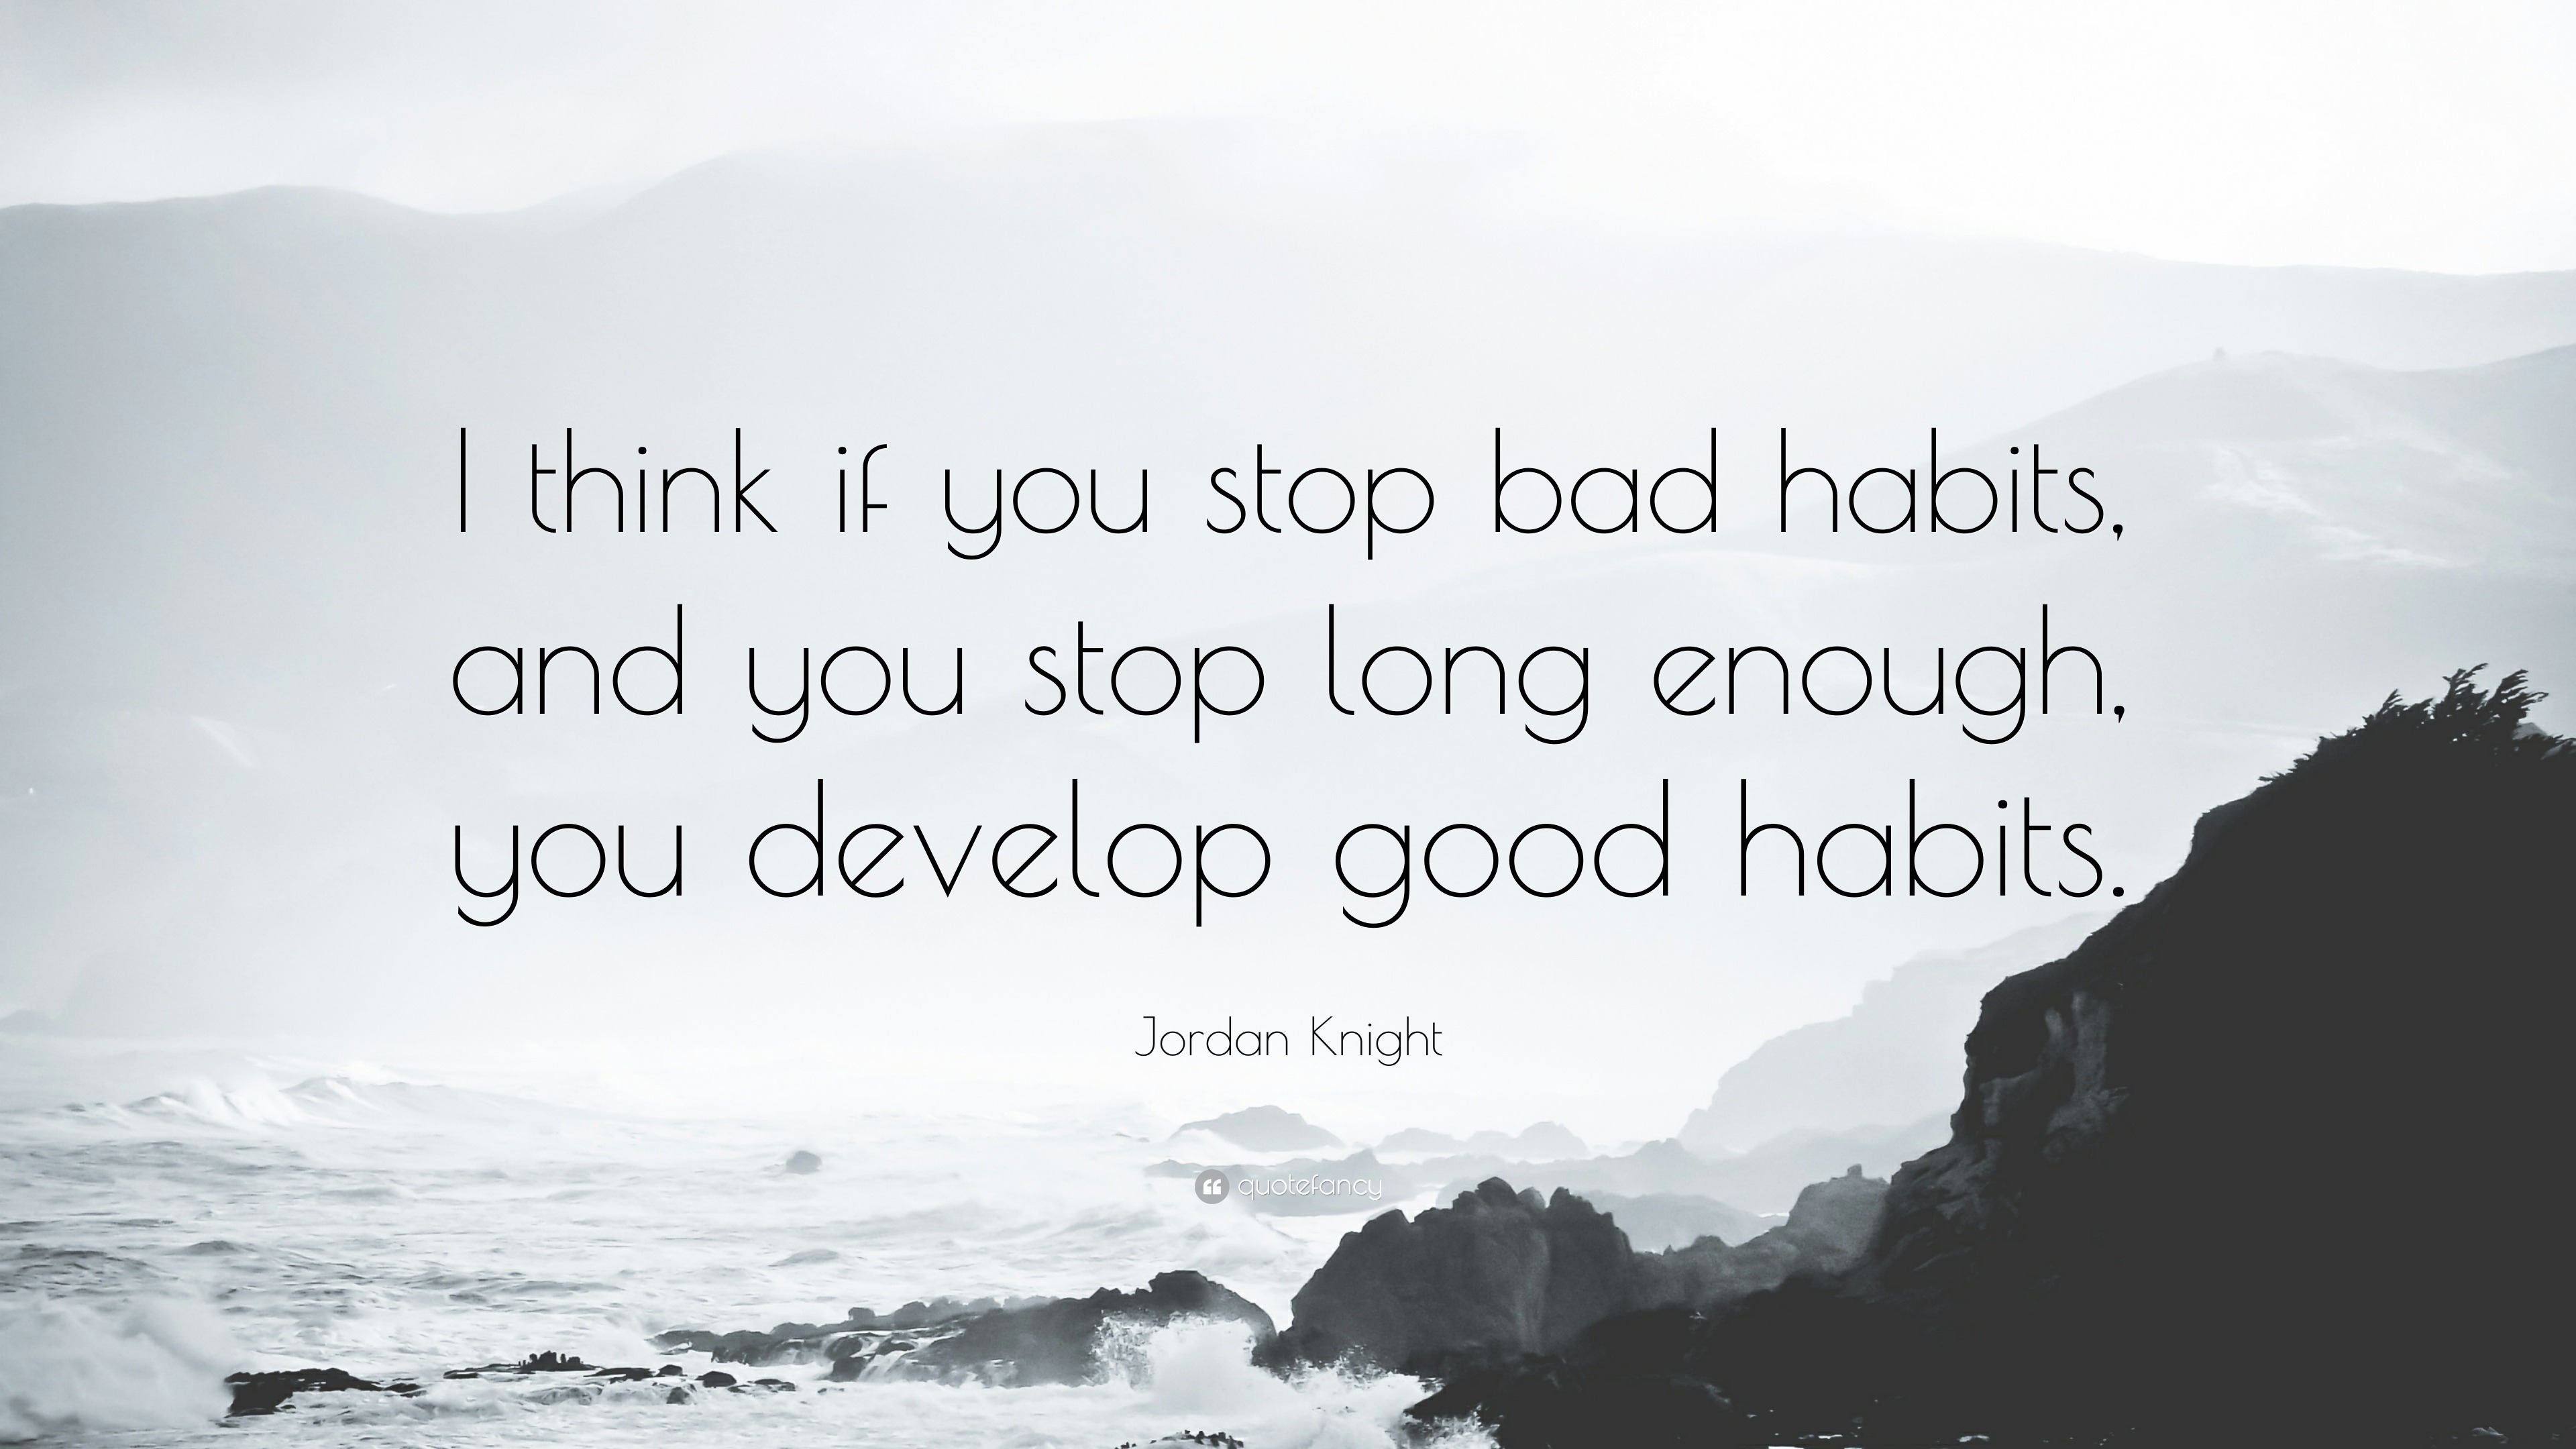 https://quotefancy.com/media/wallpaper/3840x2160/1513927-Jordan-Knight-Quote-I-think-if-you-stop-bad-habits-and-you-stop.jpg